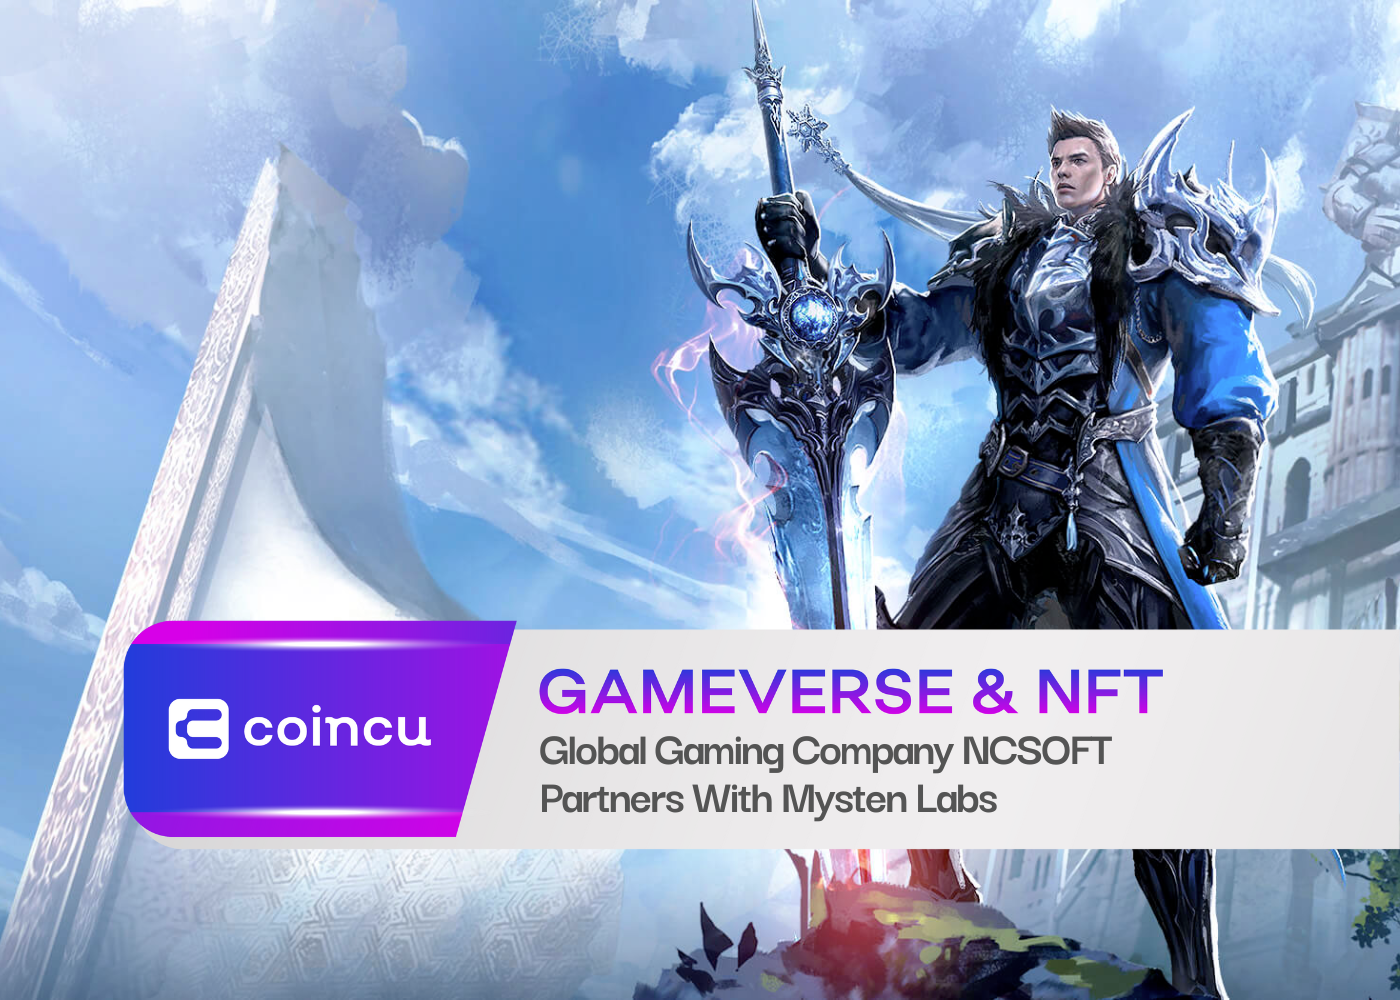 Global Gaming Company NCSOFT Partners With Mysten Labs